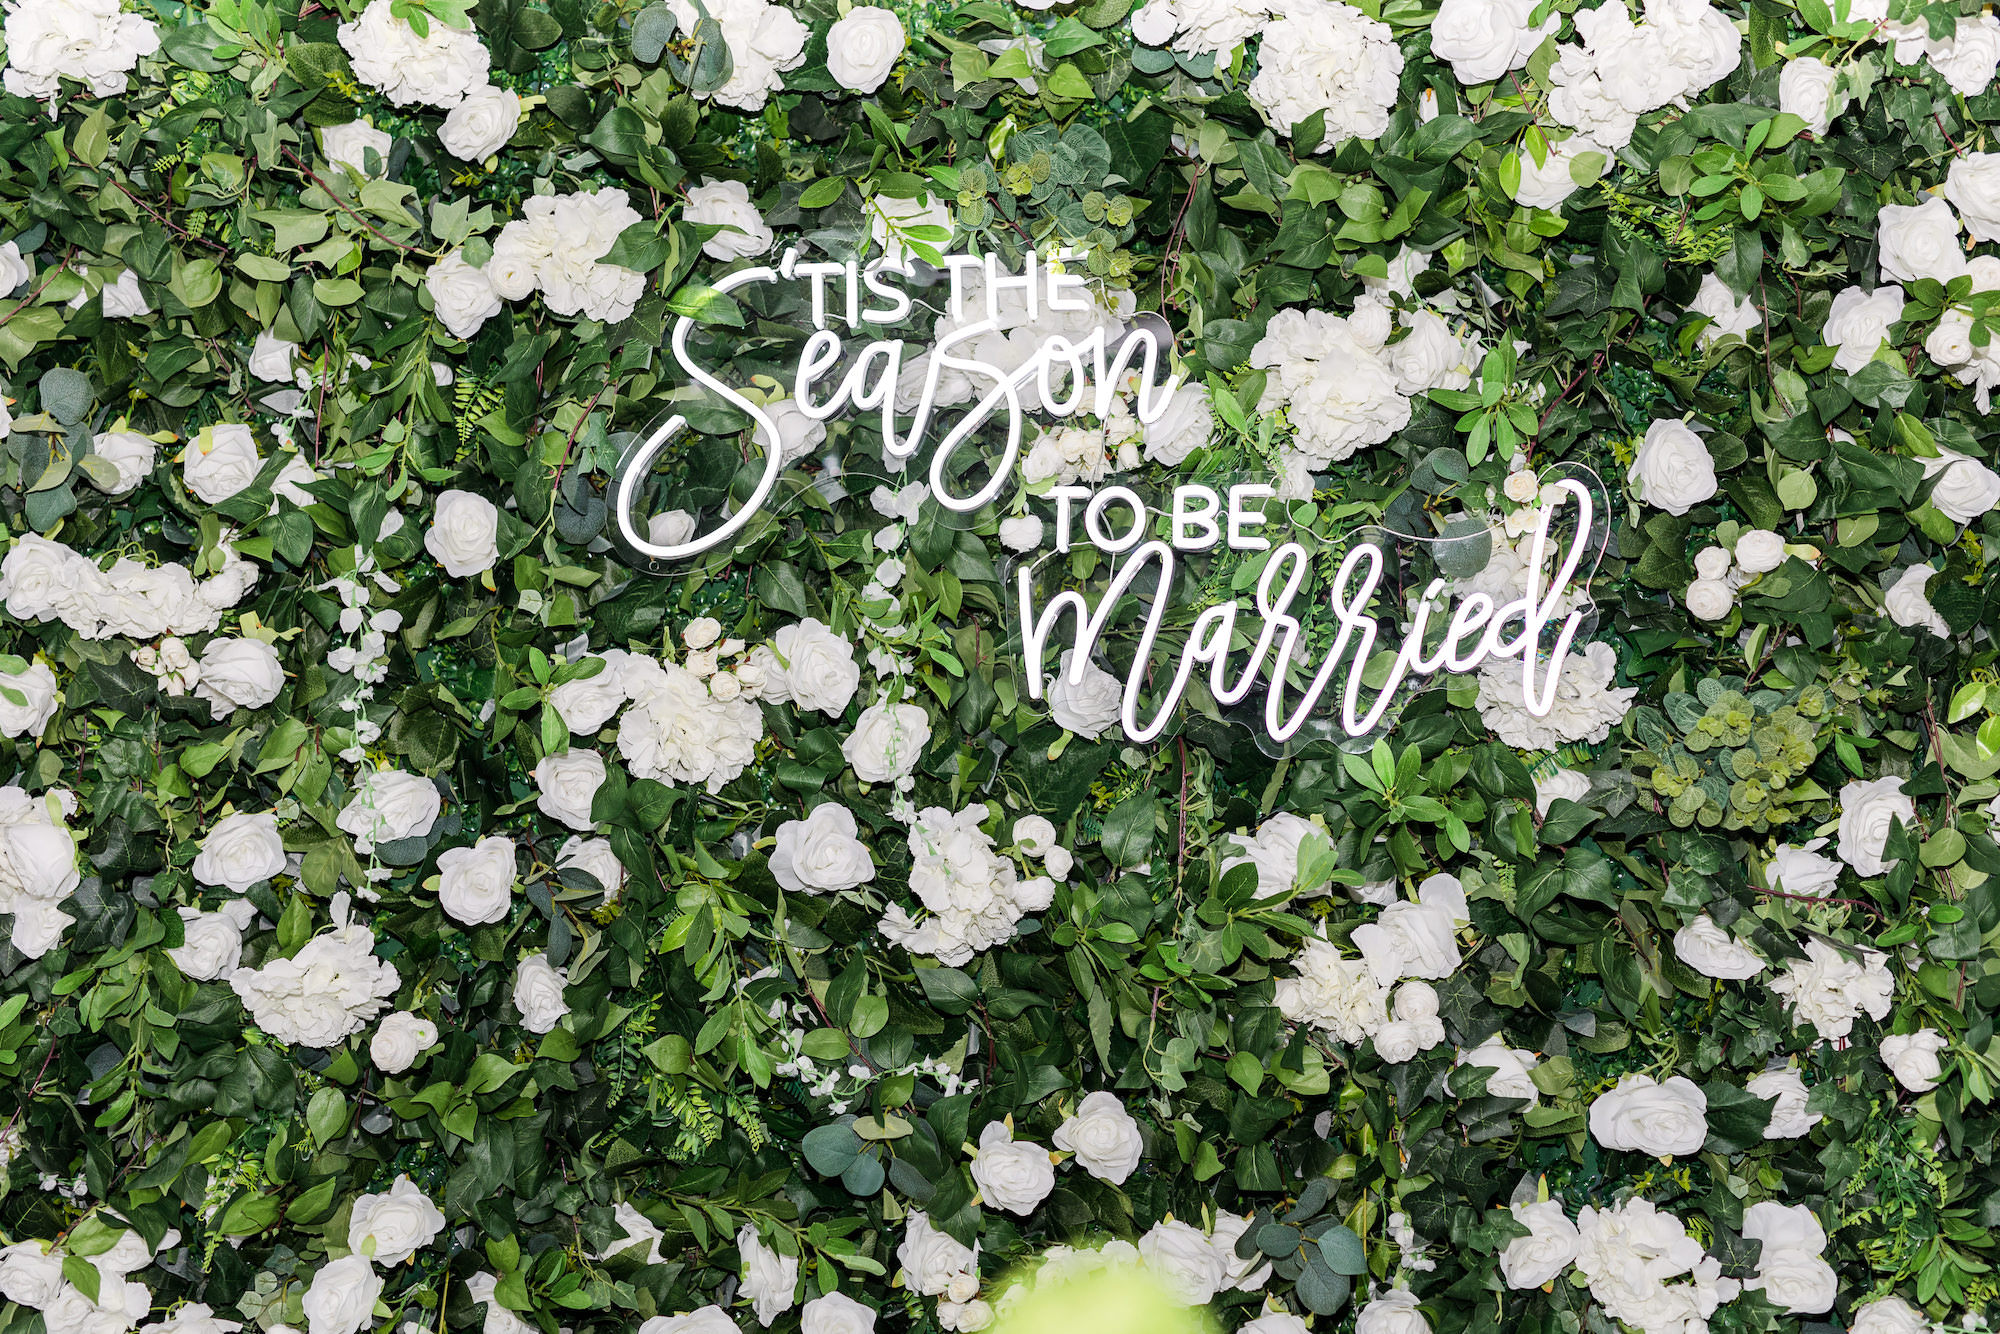 Winter Modern Whimsical Wedding Reception Decor, Greenery Wall with Lush White Roses, Hydrangeas and White "Tis the Season to Be Married" Neon Sign | Tampa Bay Wedding Planner MDP Events Planning | Wedding